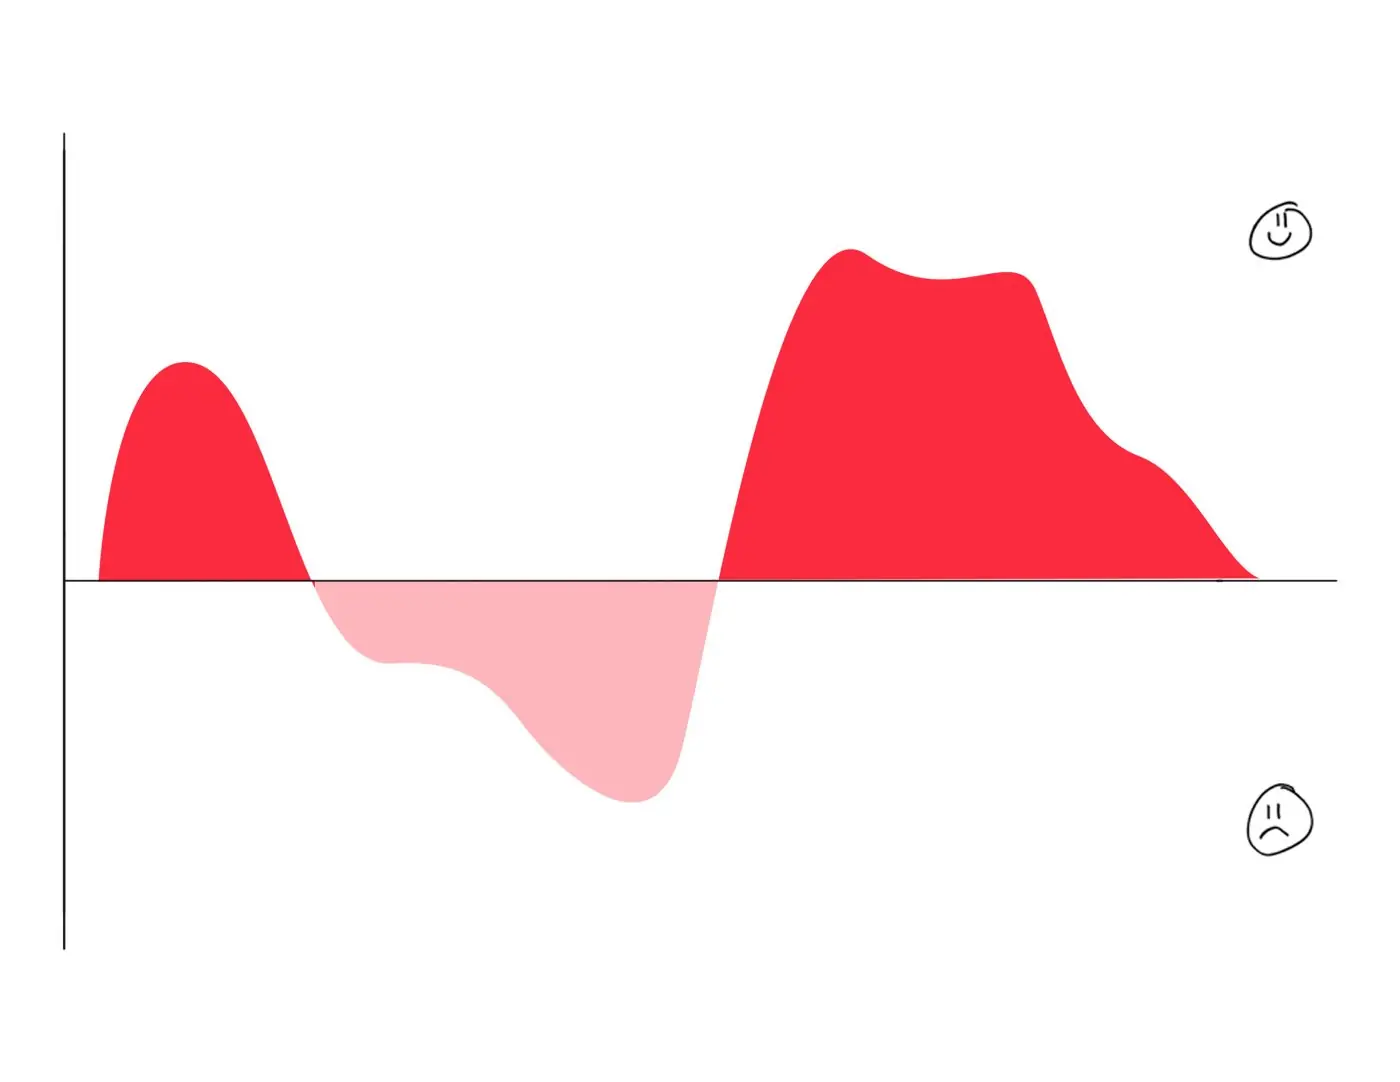 a line graph showing the idea of data with and a smiley face above the x axis and a frowning face below the x axis